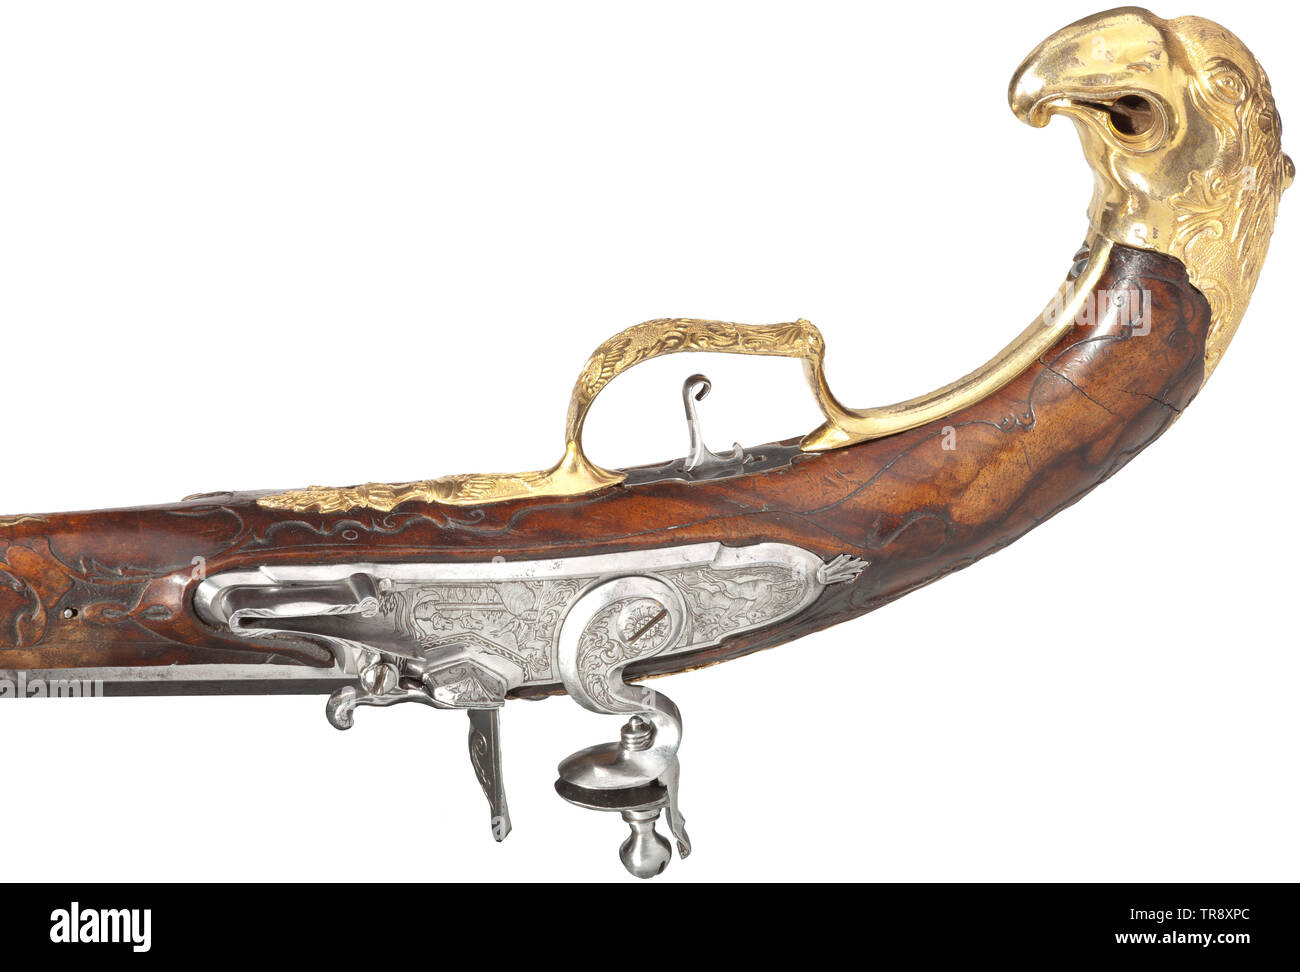 A pair of magnificent flintlock pistols, Karlovy Vary, circa 1760 Round barrels with flattened midrib, smooth bores in 13 mm calibre. Flintlocks with finely engraved depiction of a sitting huntress with dogs, beside her fleeing red deer. Slightly carved full stocks made from walnut with noses made from dark horn. Furnitures made from fire-gilt brass in lavish relief. The side plates with multi-figured hunting scenes, the pommels shaped like sculptural bird's heads. Original, wooden ramrods with horn tips. Length 39 cm each. High-grade pair of pis, Additional-Rights-Clearance-Info-Not-Available Stock Photo